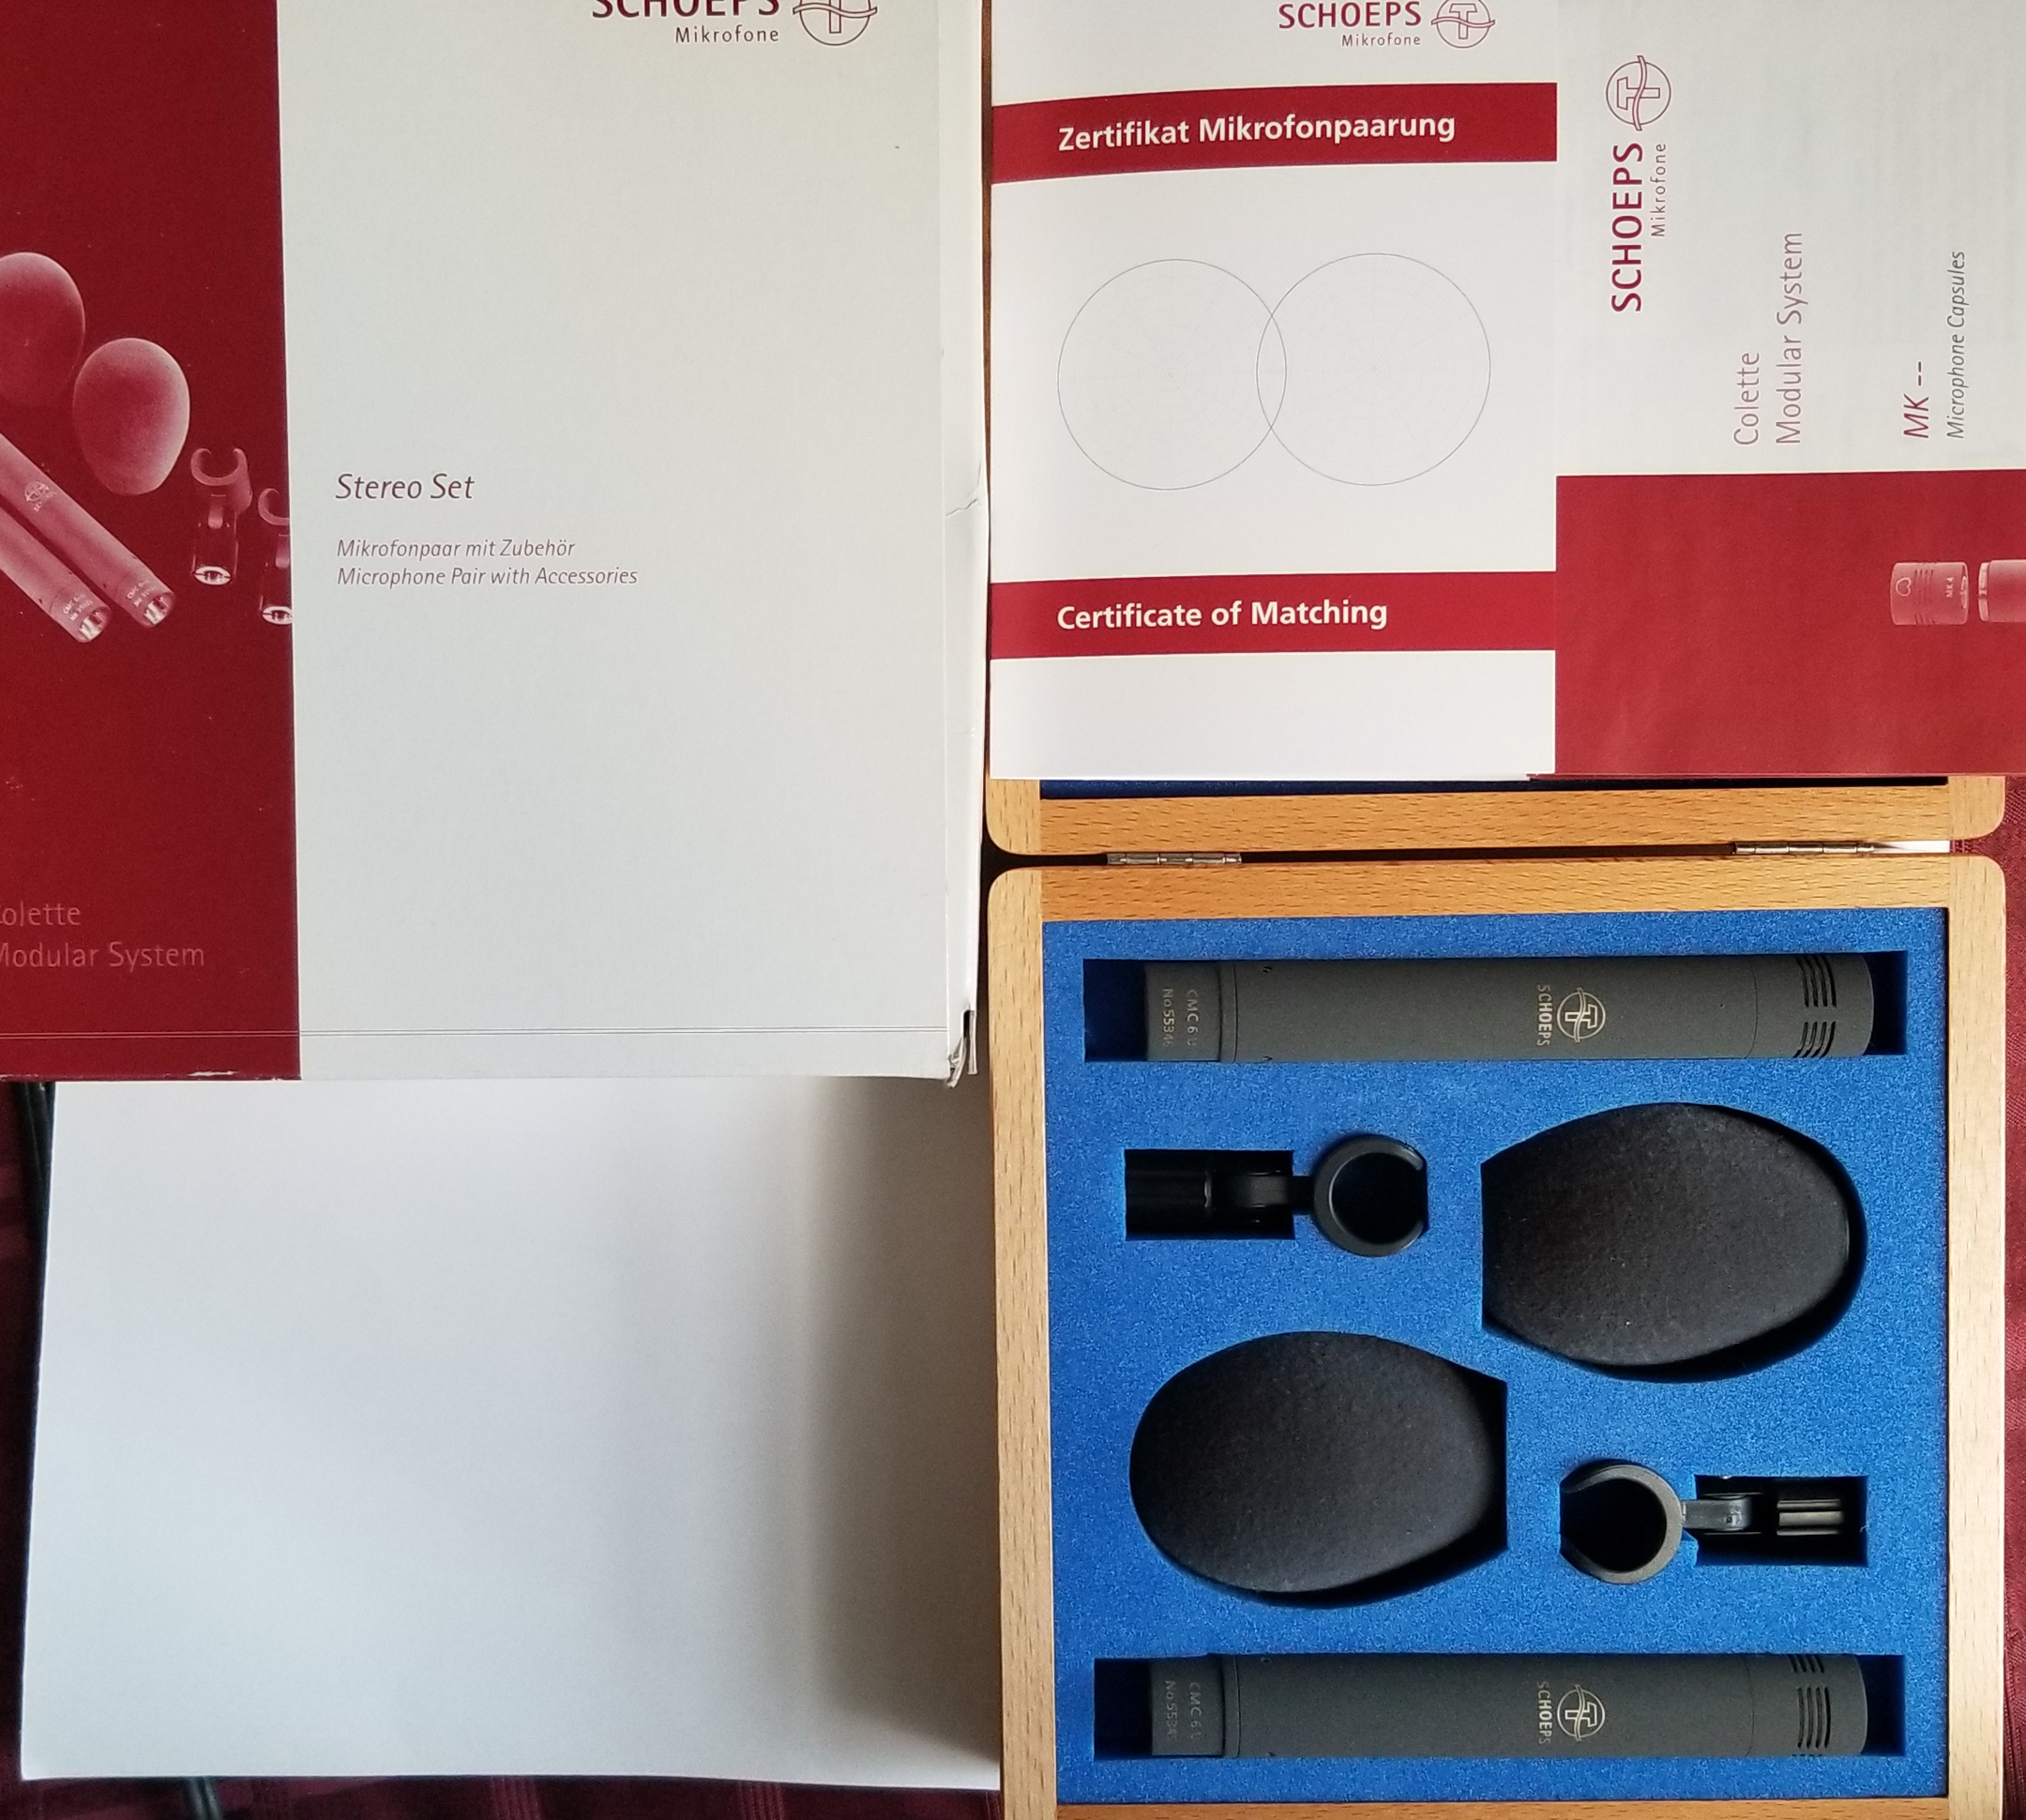 Schoeps Colett Series CMC64 stereo match pair gear for sale full package